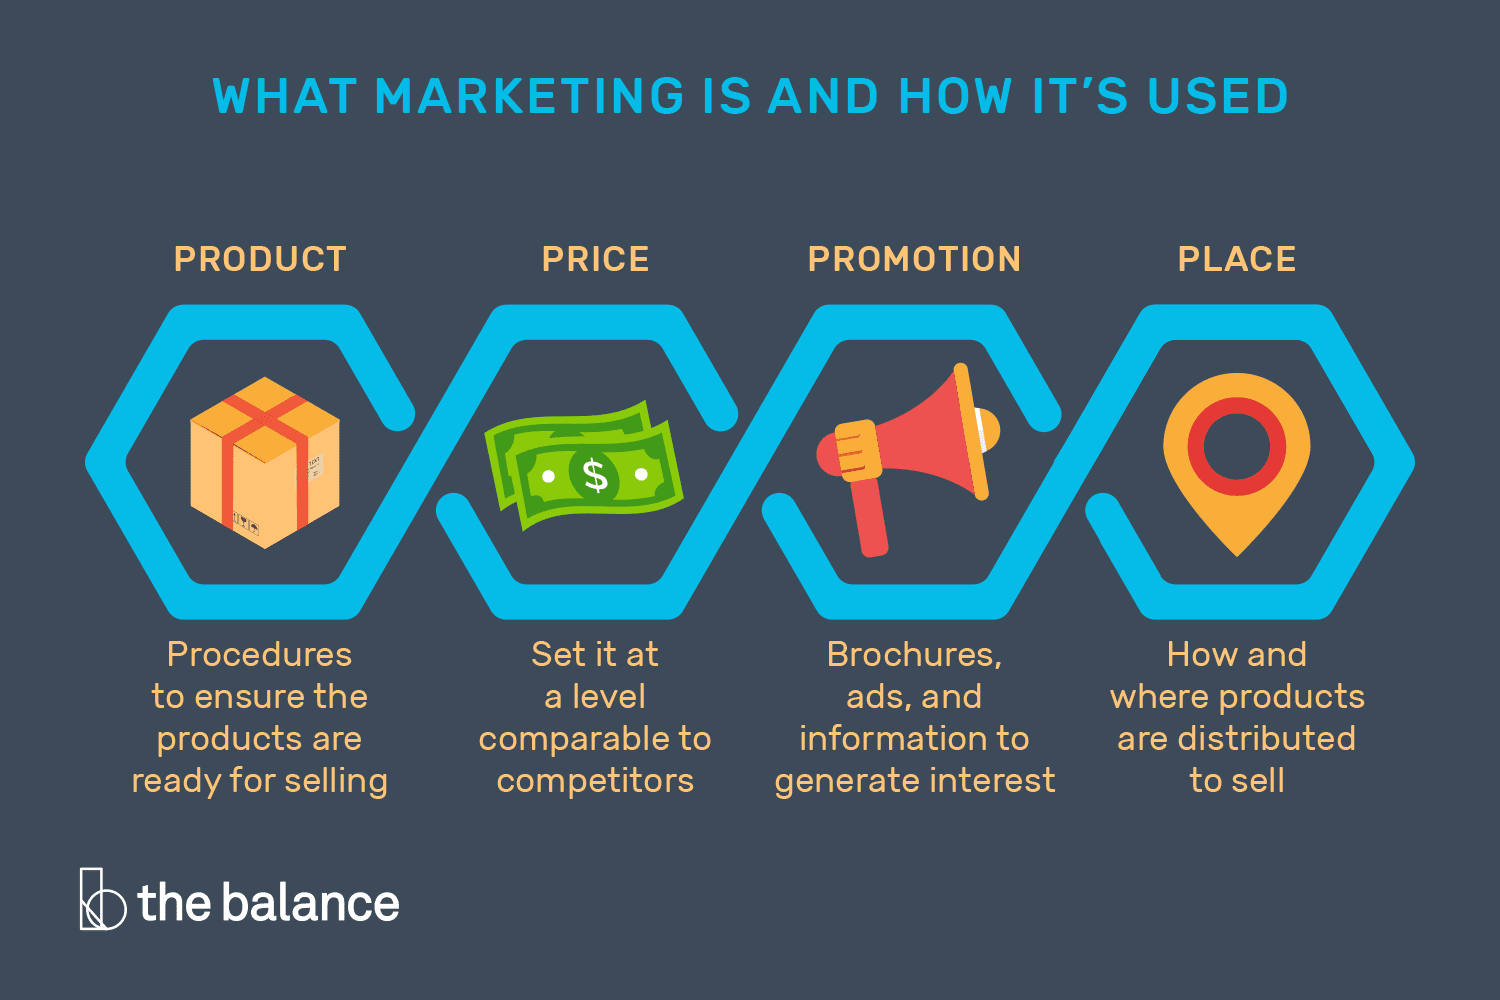 Advertising marketing is. What is marketing. Marketing is. What is marketing and promotion. What's marketing.